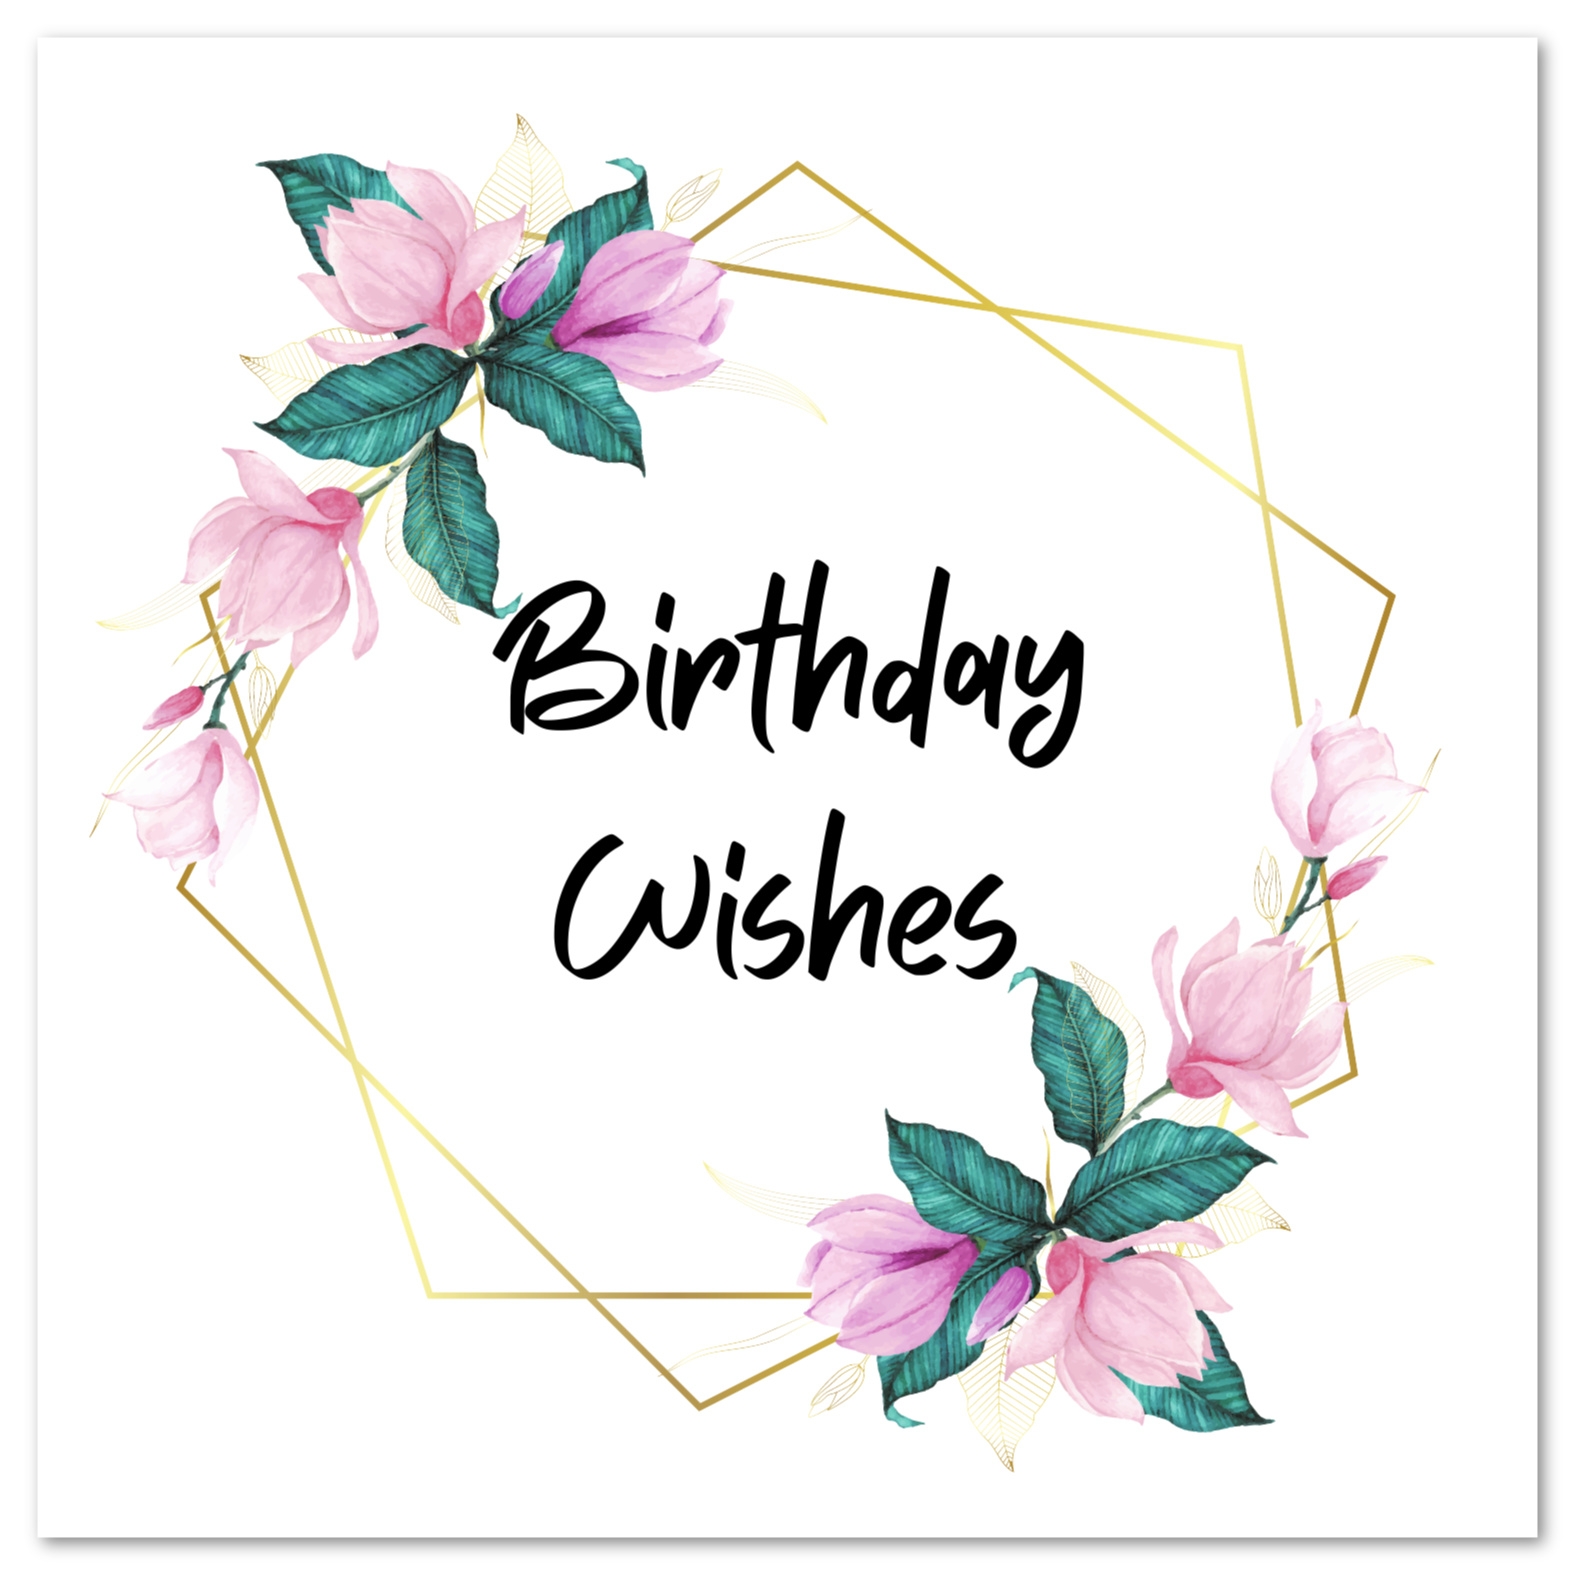 Free Printable Birthday Cards - Free Printable Birthday Cards For Her